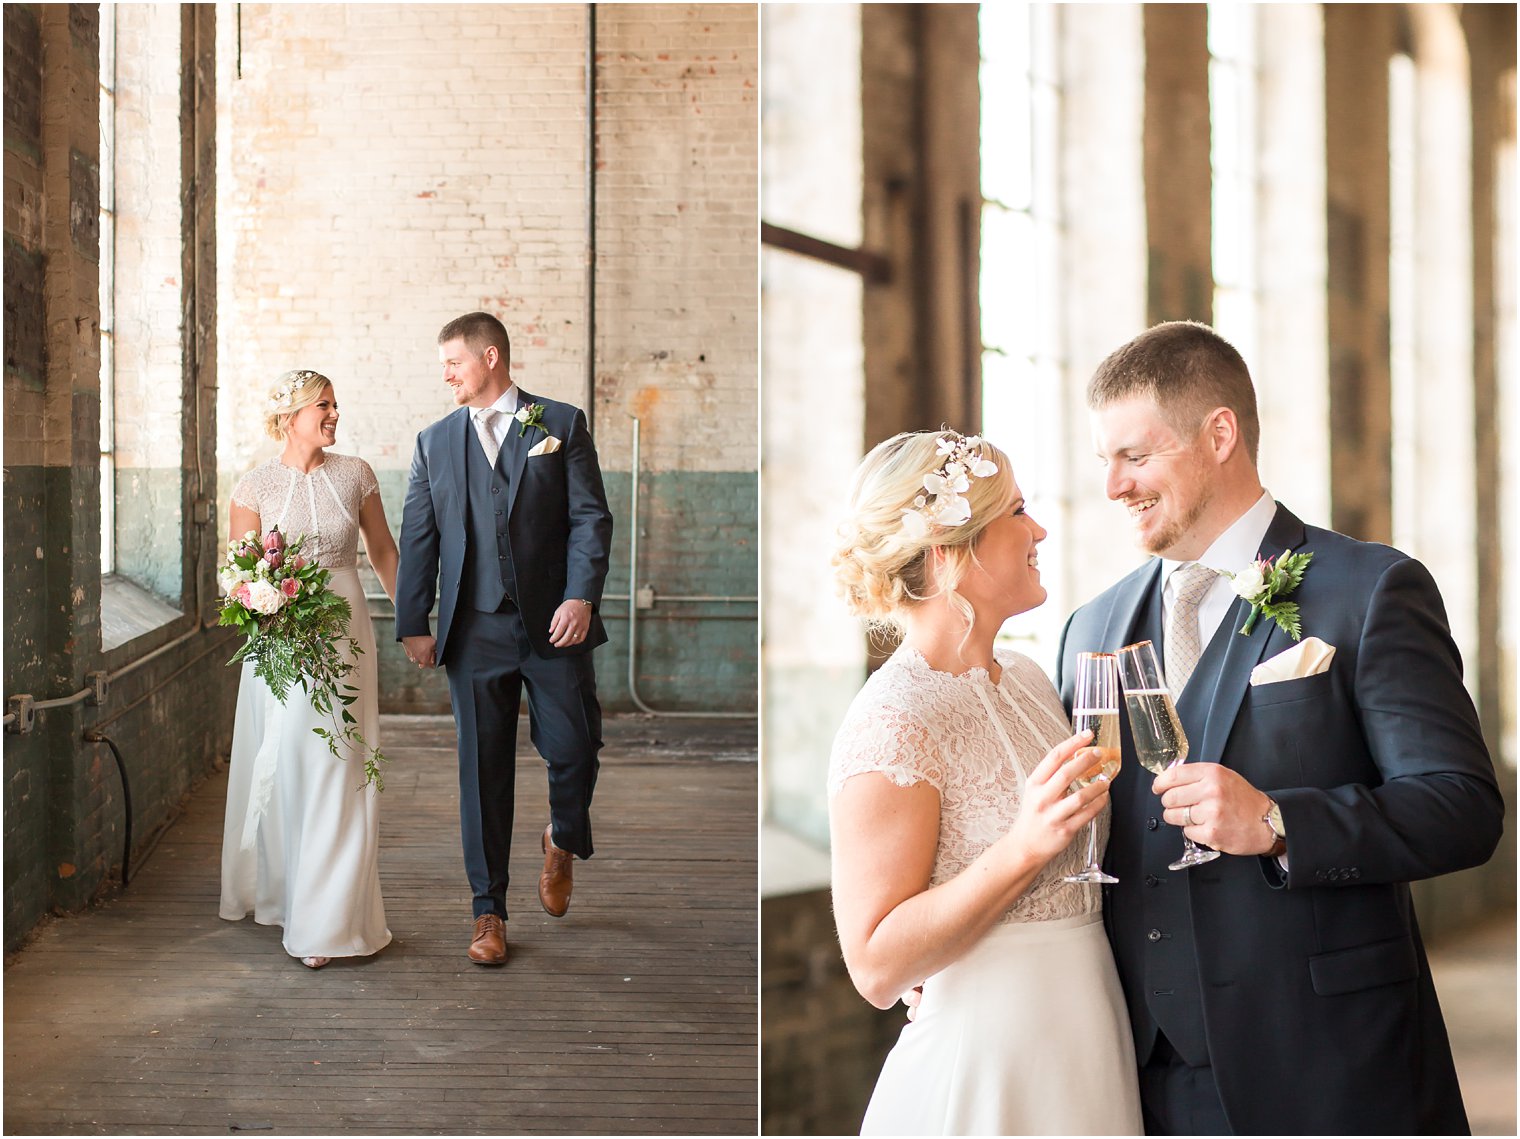 Candid moments during portraits of bride and groom